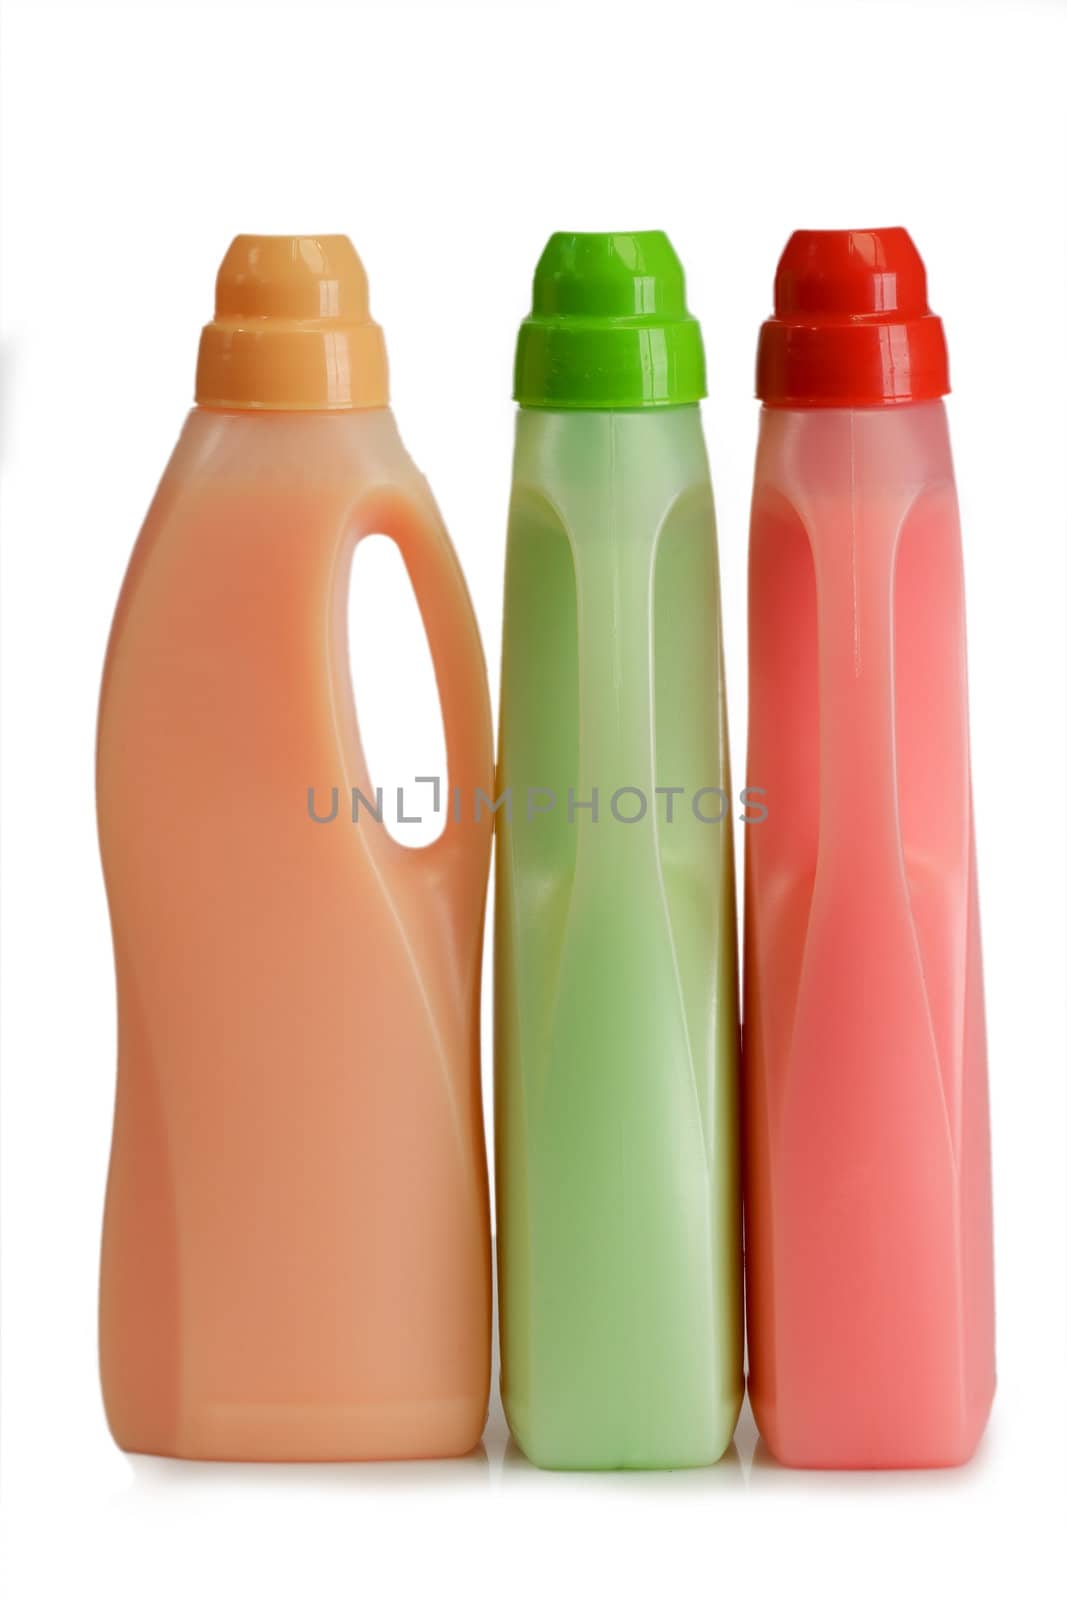 Bottles of laundry detergent and fabric softener on a white background